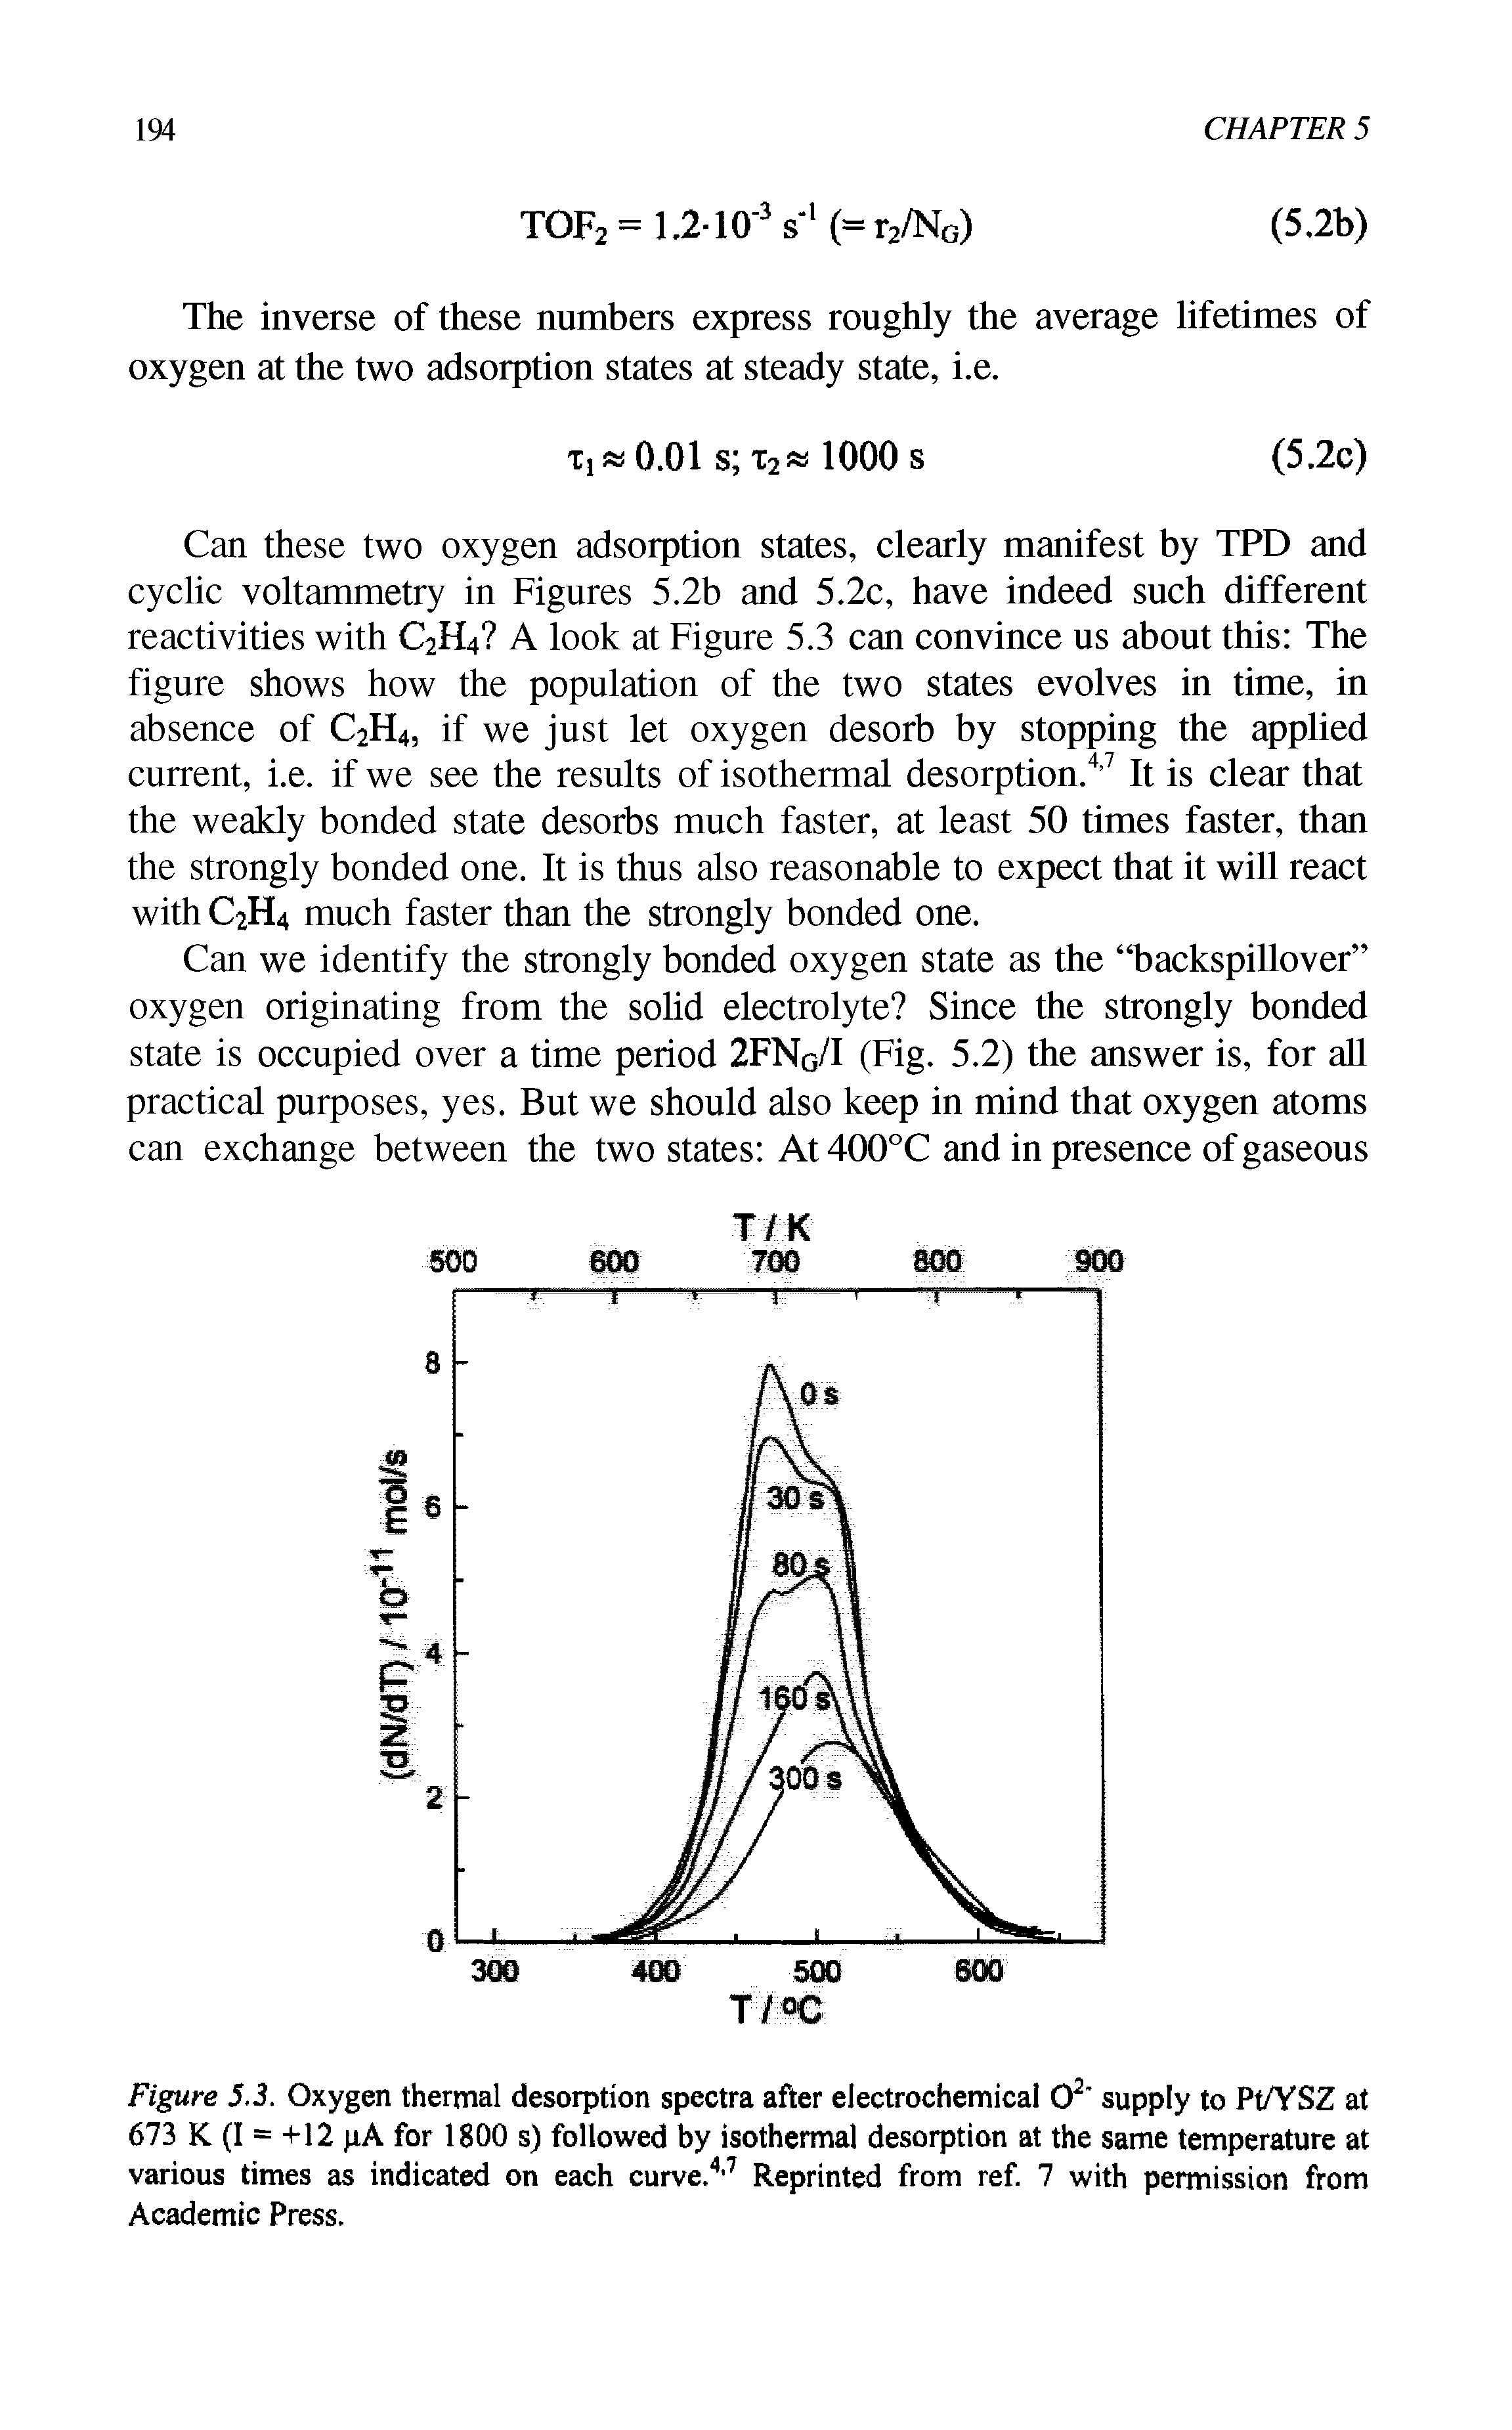 Figure 5.3. Oxygen thermal desorption spectra after electrochemical O2 supply to Pt/YSZ at 673 K (I = +12 pA for 1800 s) followed by isothermal desorption at the same temperature at various times as indicated on each curve.4,7 Reprinted from ref. 7 with permission from Academic Press.